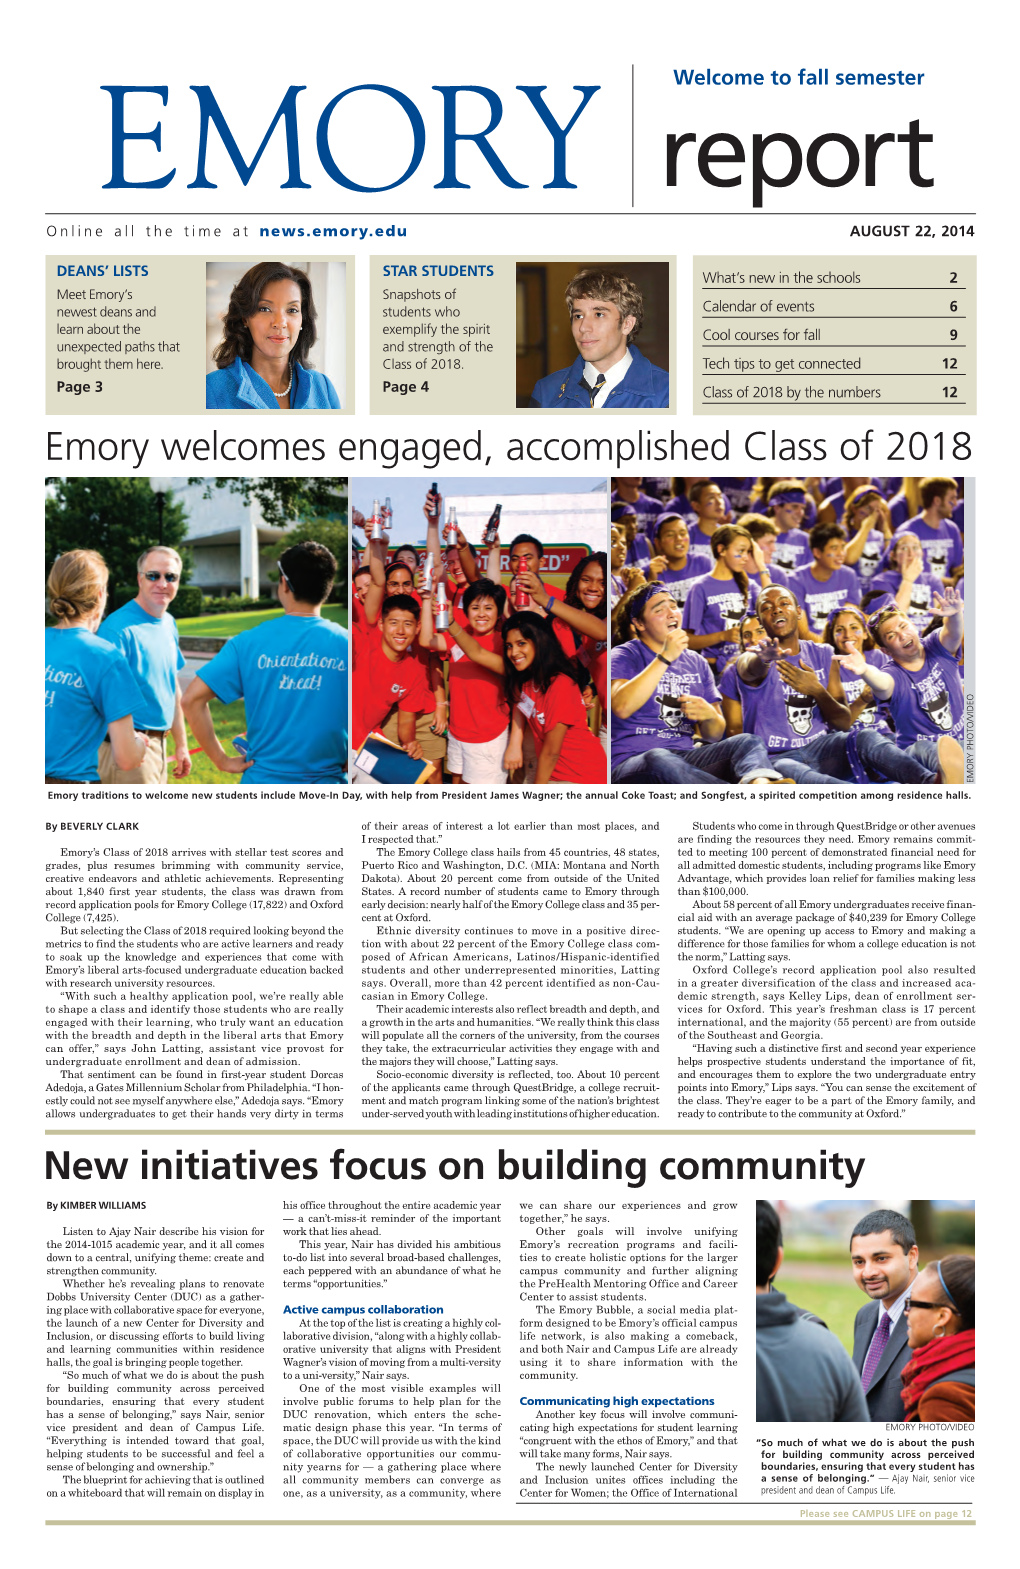 Emory Welcomes Engaged, Accomplished Class of 2018 New Initiatives Focus on Building Community